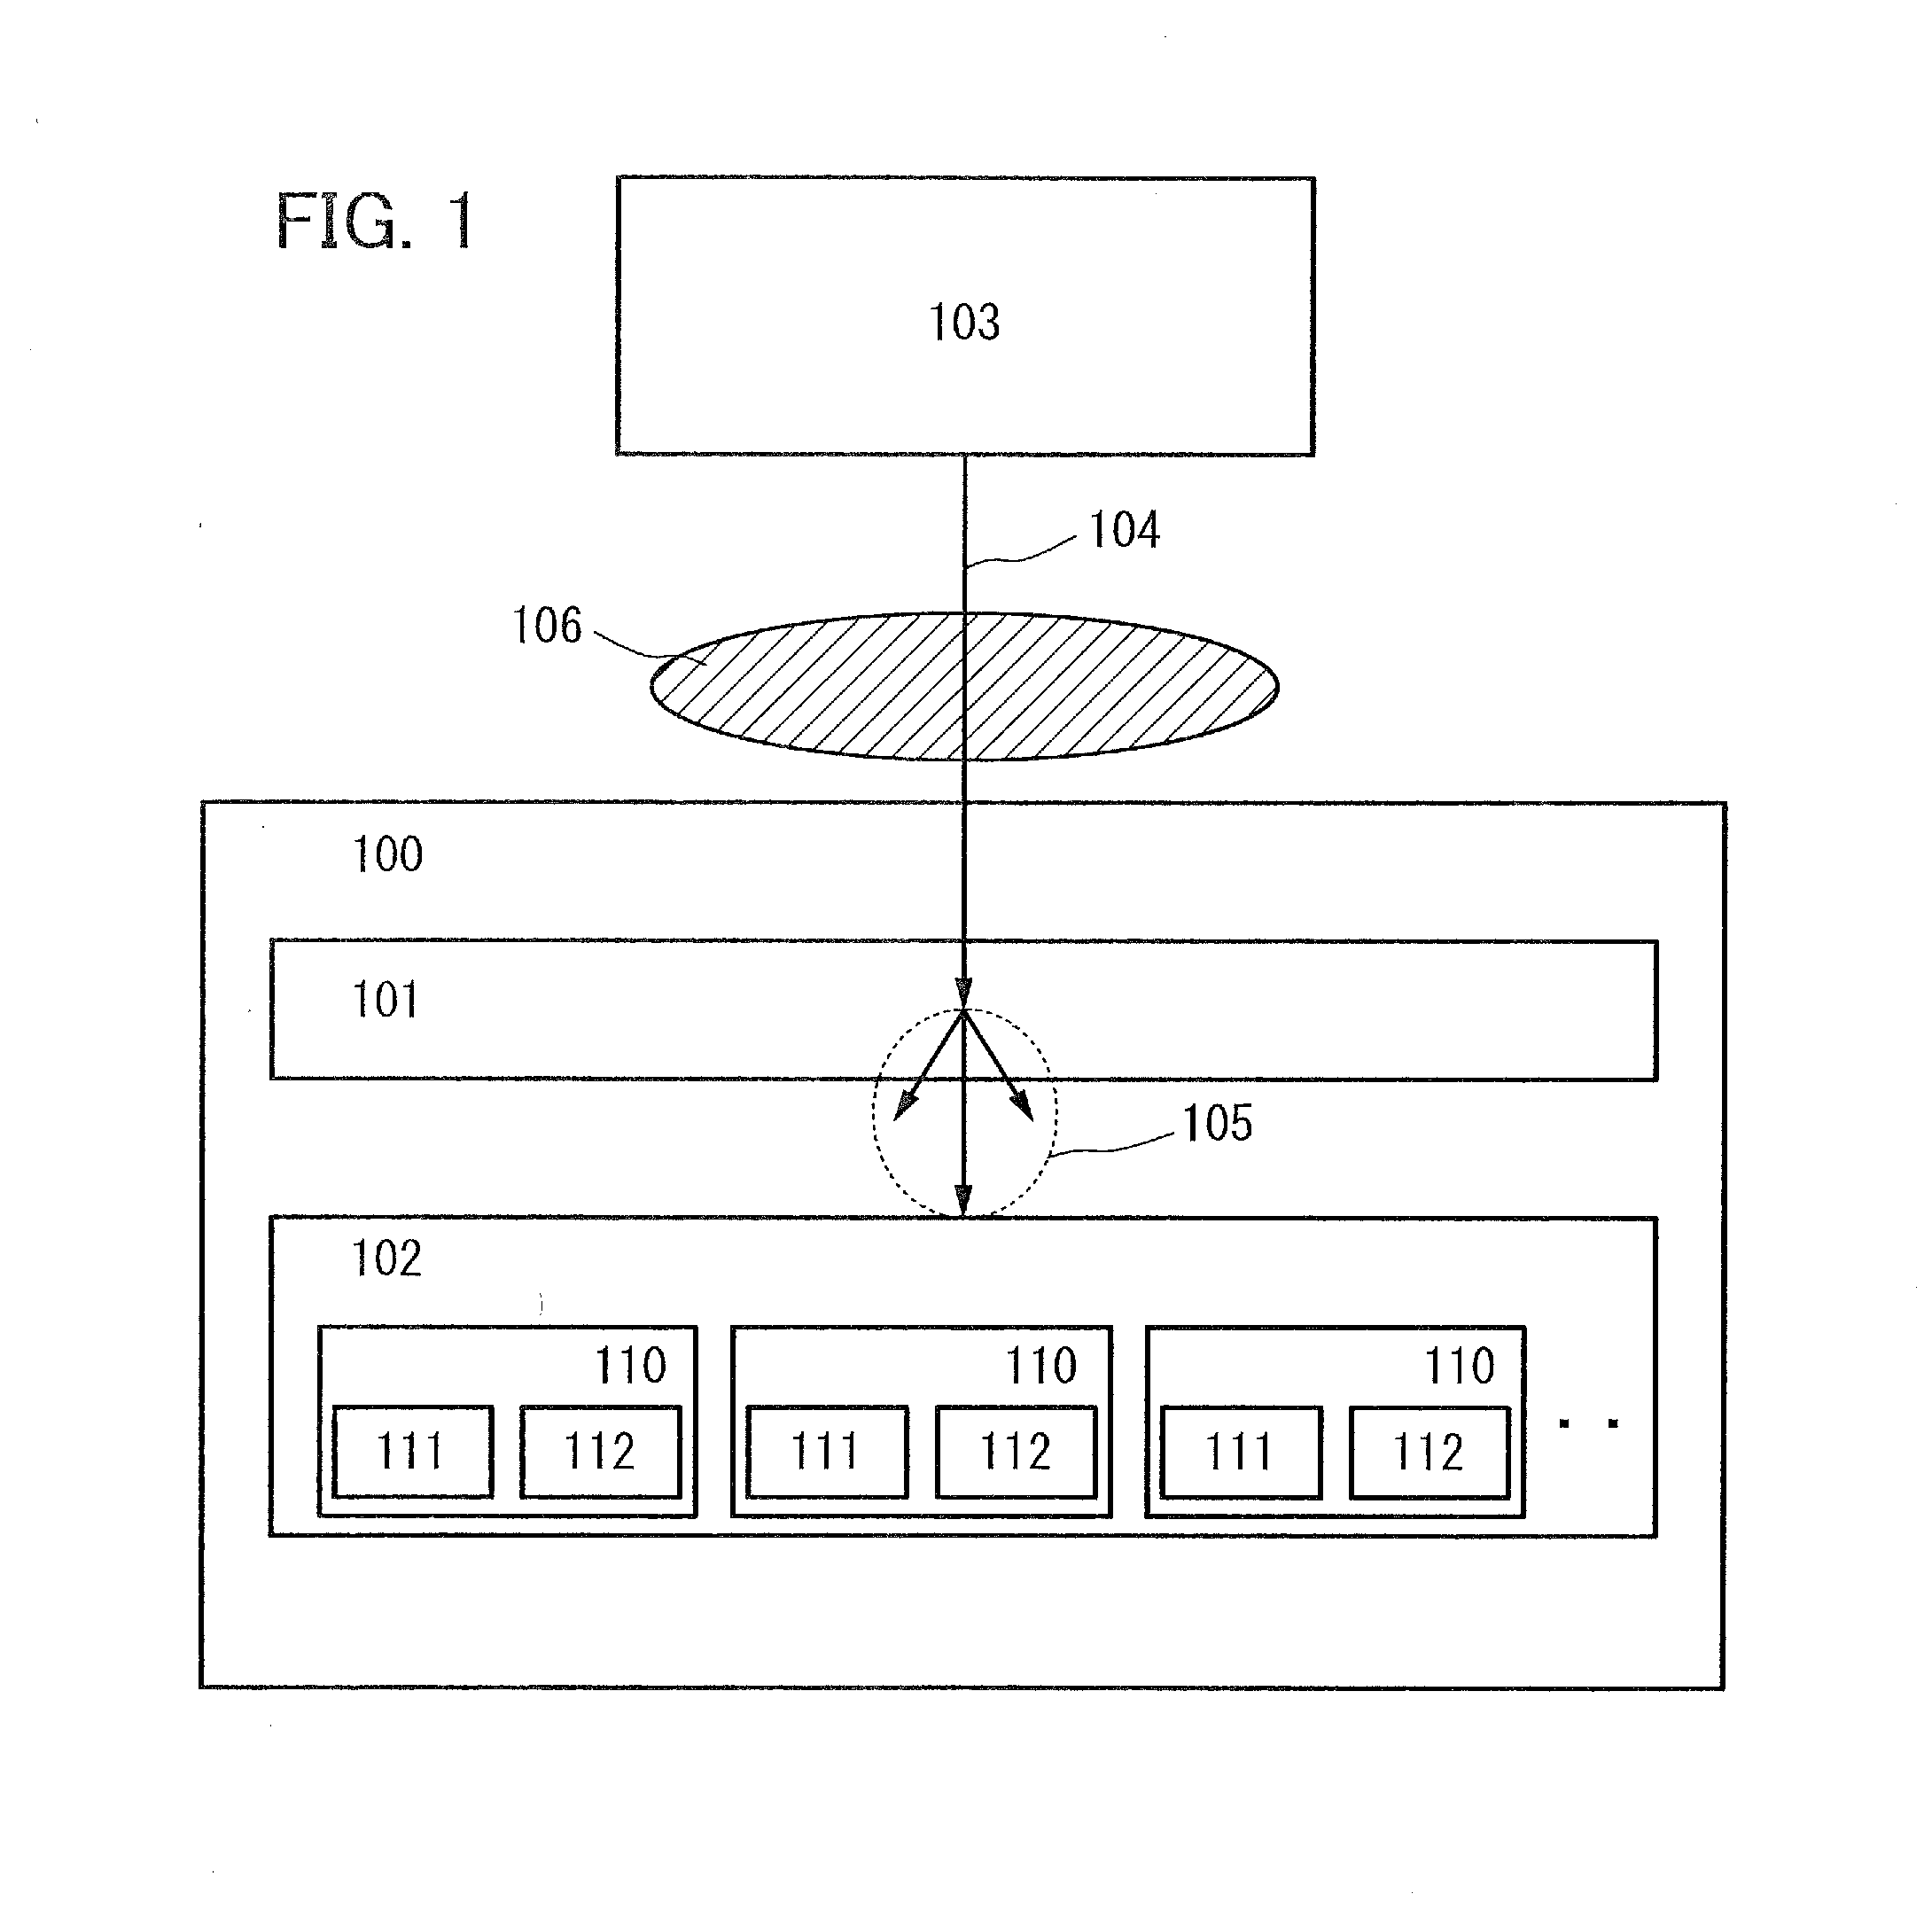 Radiation detection panel, radiation imaging device, and diagnostic imaging device